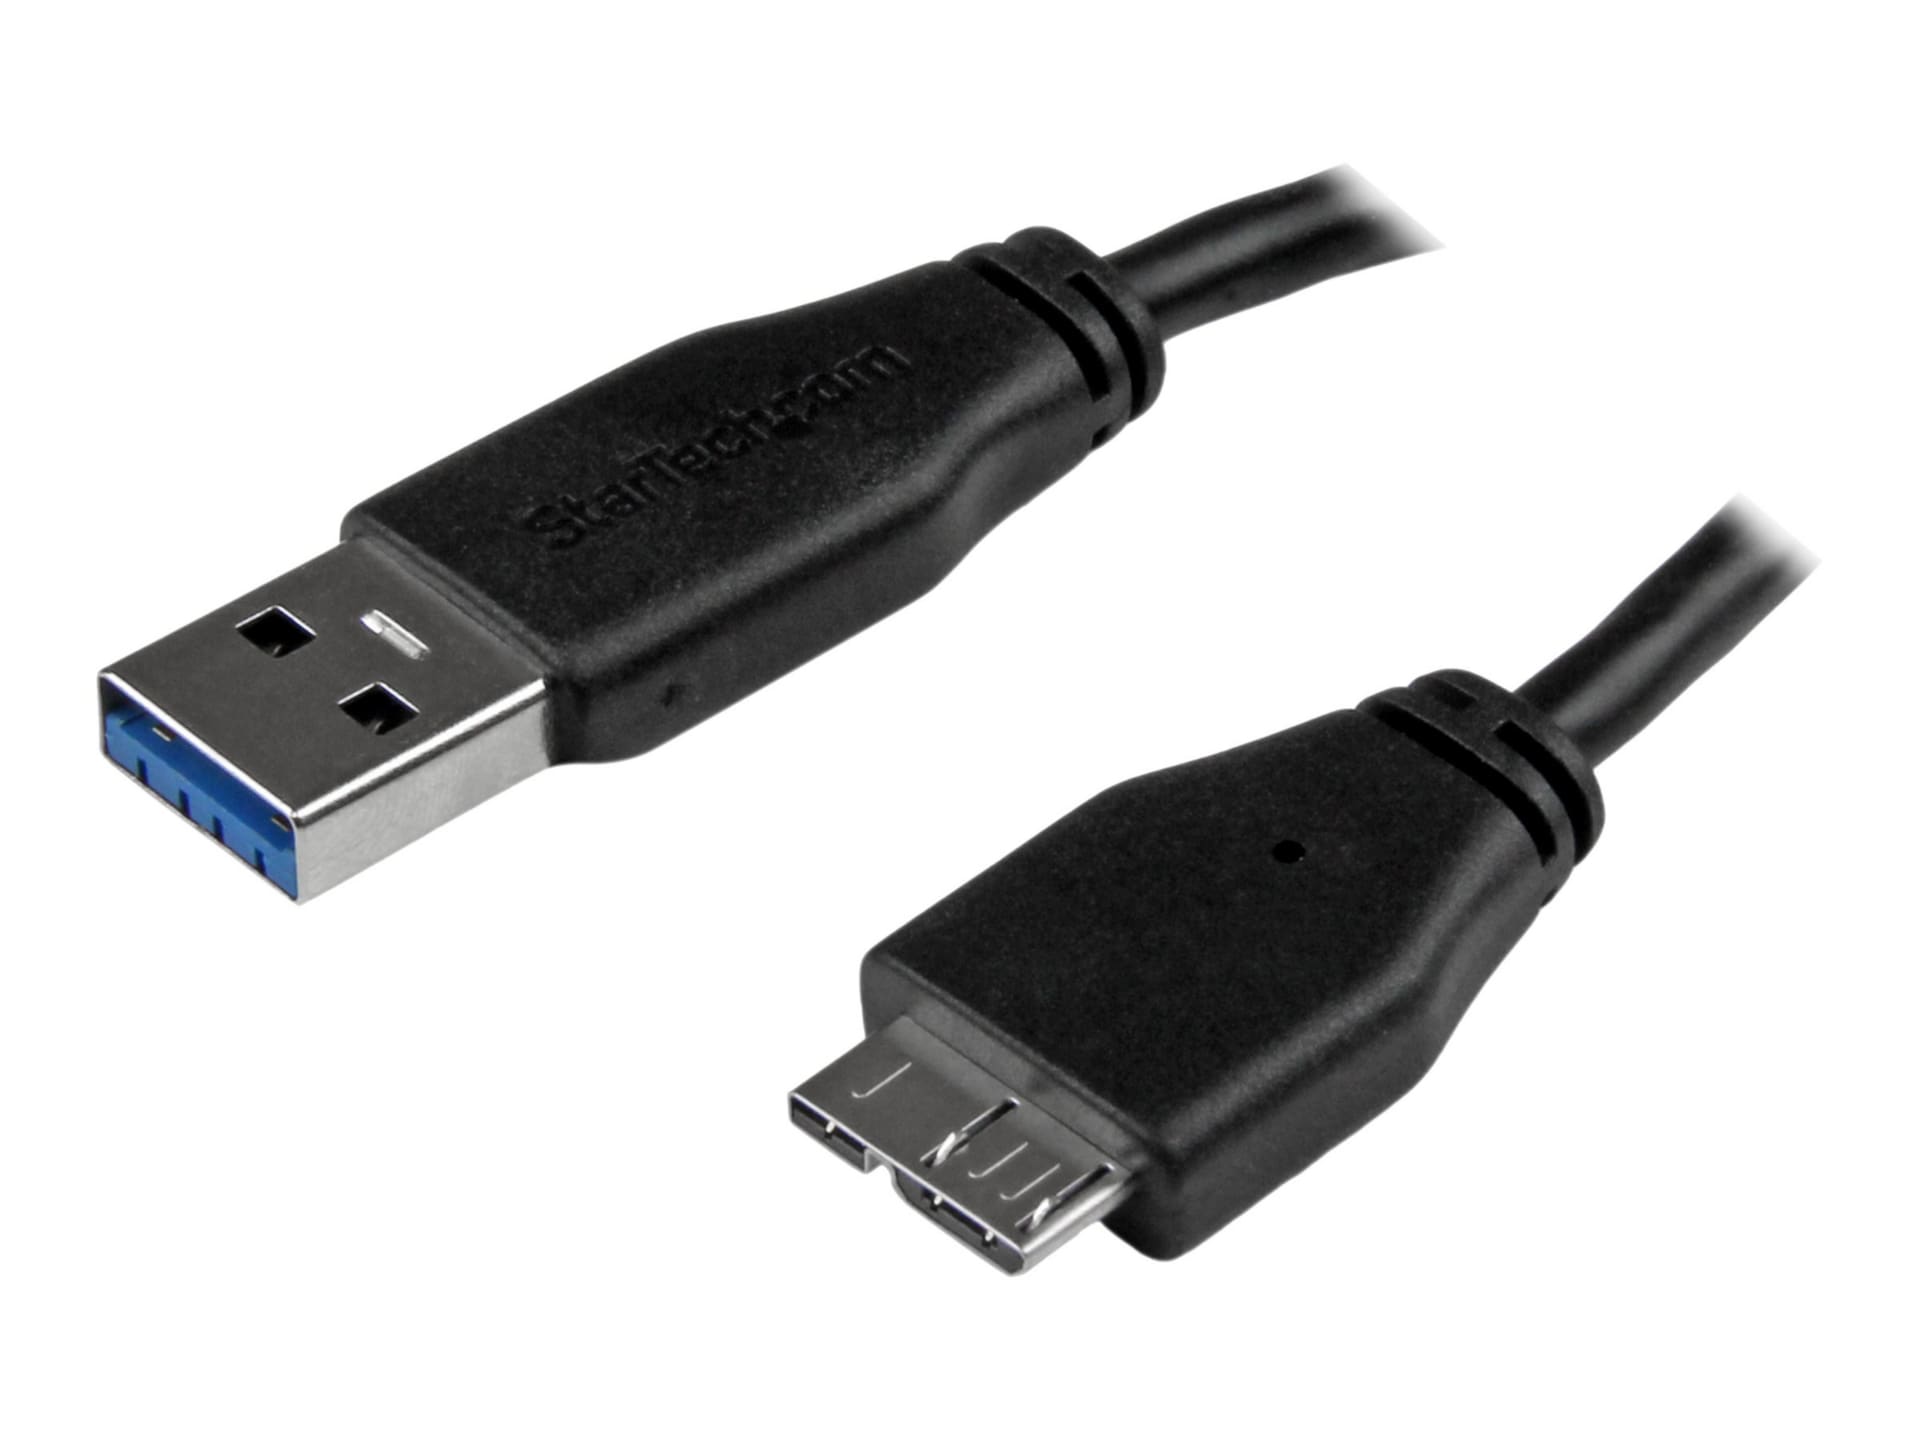 StarTech.com 0.5m (20in) Slim SuperSpeed USB 3.0 (5Gbps) A to Micro B Cable - M/M